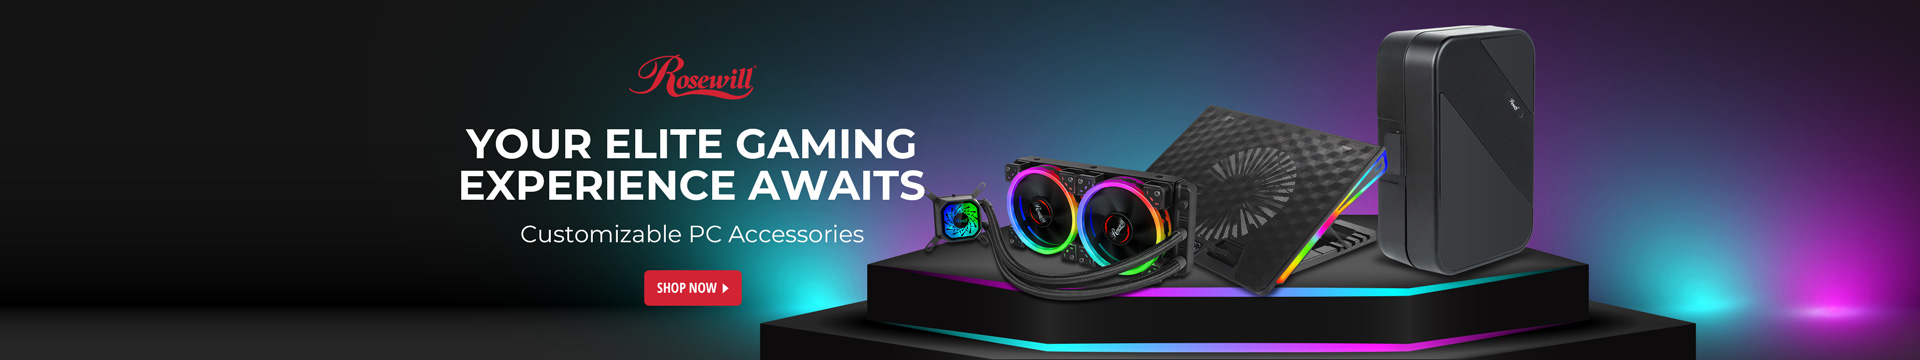 Rosewill - Your Elite Gaming Experience Awaits